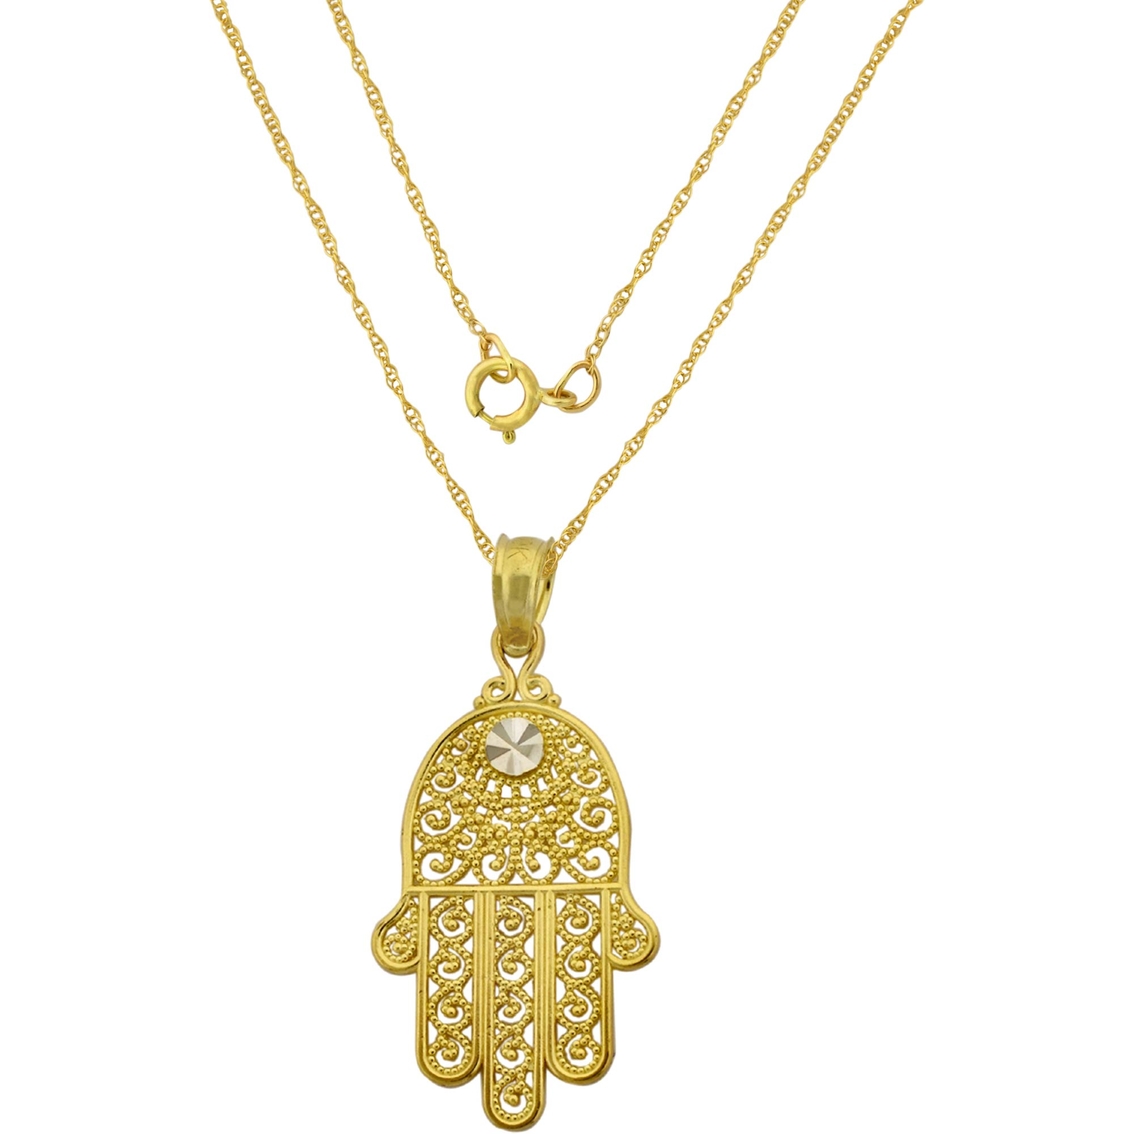 Gold Pendant G418 5pcs Gold Hamsa Hand Pendant Amulet and Spiritual Charm Protection and Luck Hand of God Pendant Gold Hand of God